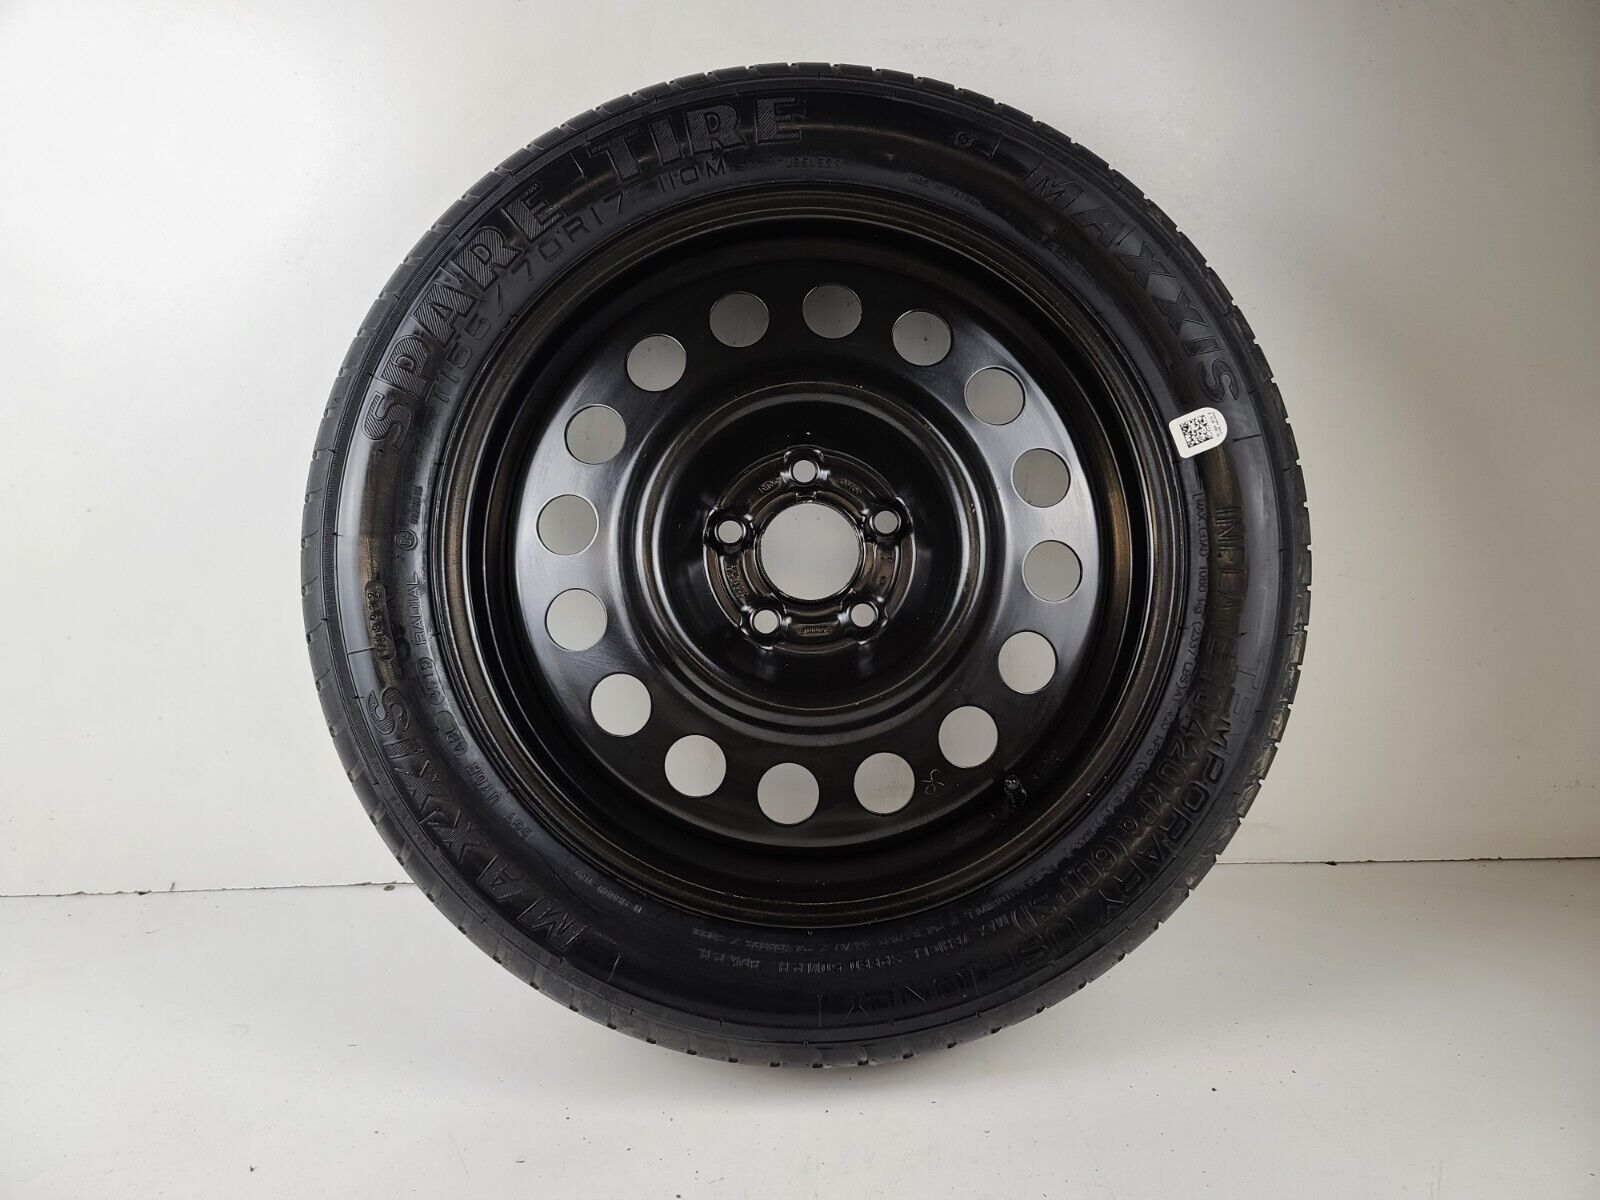 2013 - 2019 FORD ESCAPE COMPACT SPARE TIRE DONUT MAXXIS  T155/70R17 OEM